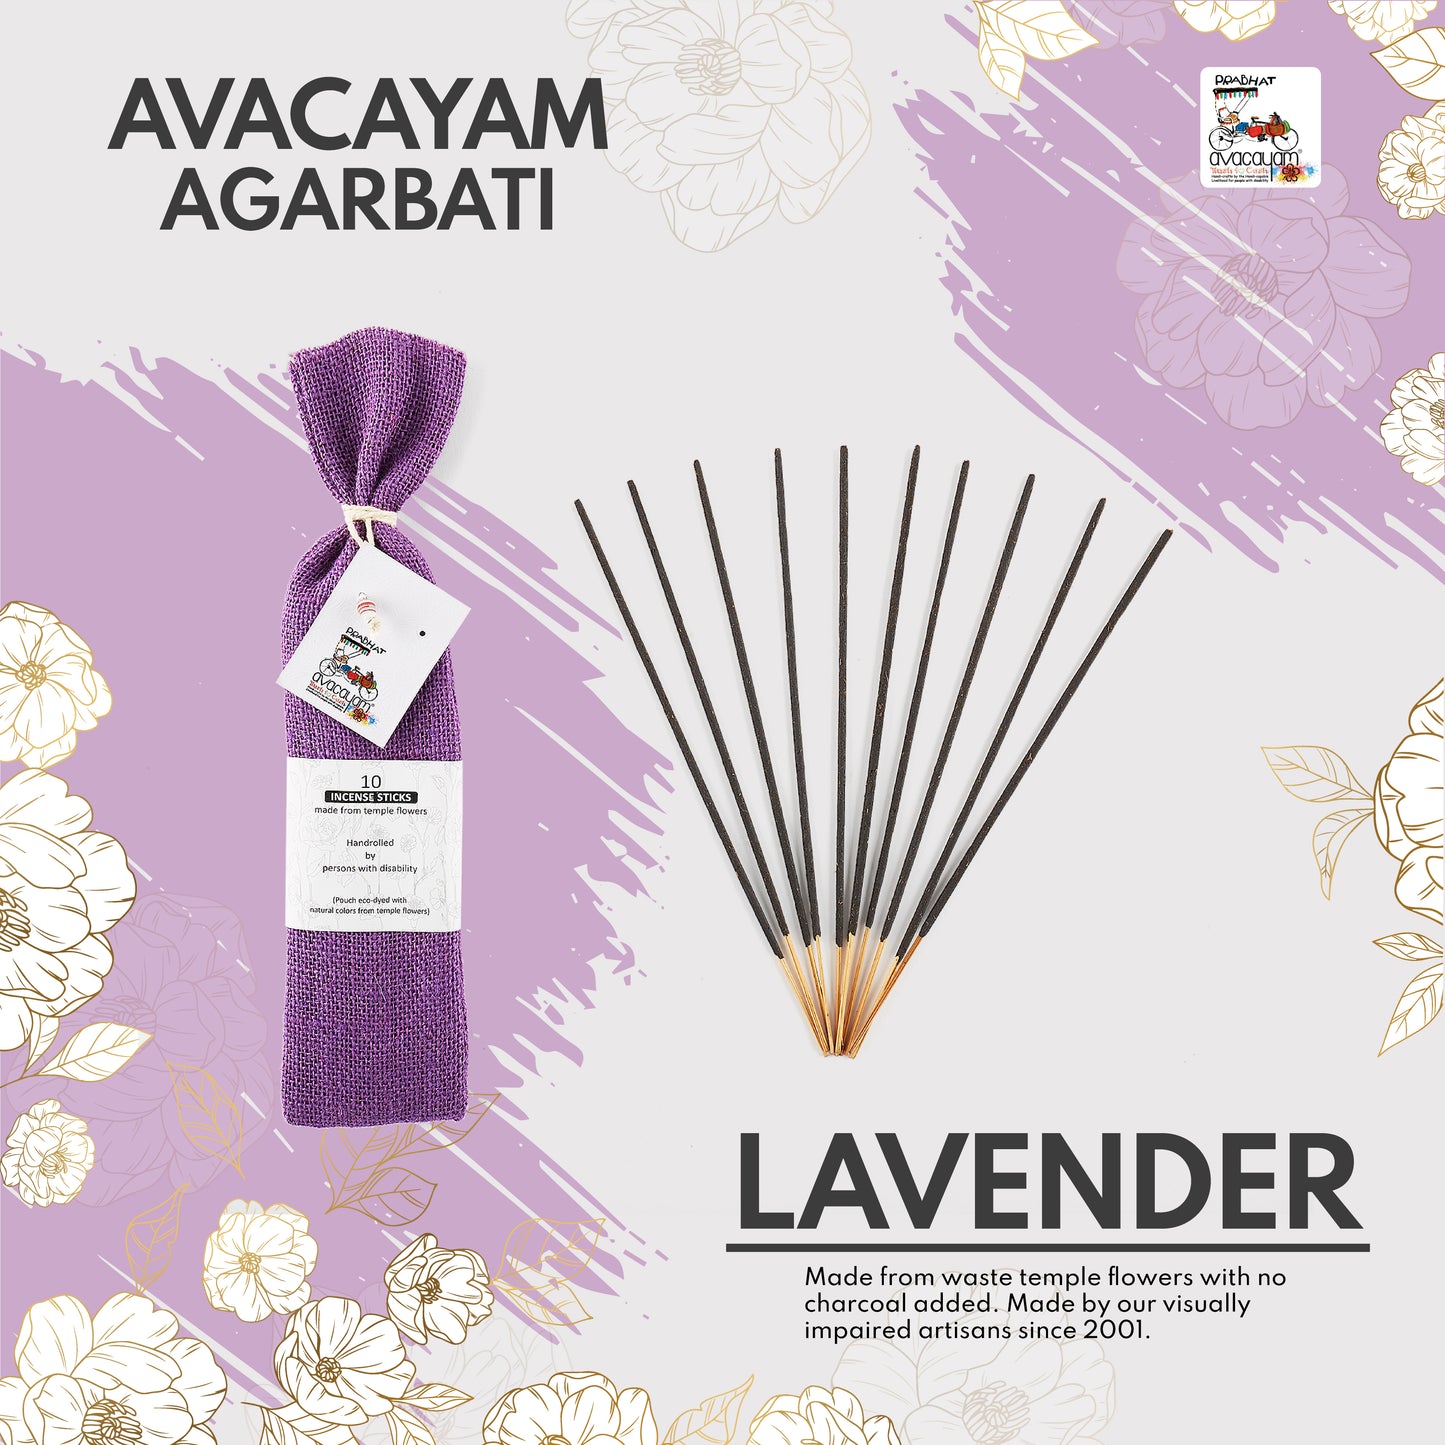 25 Lavinder Fragrance Agarbati, All Natural Agarbati made from Temple Flowers - 100% Charcoal Free